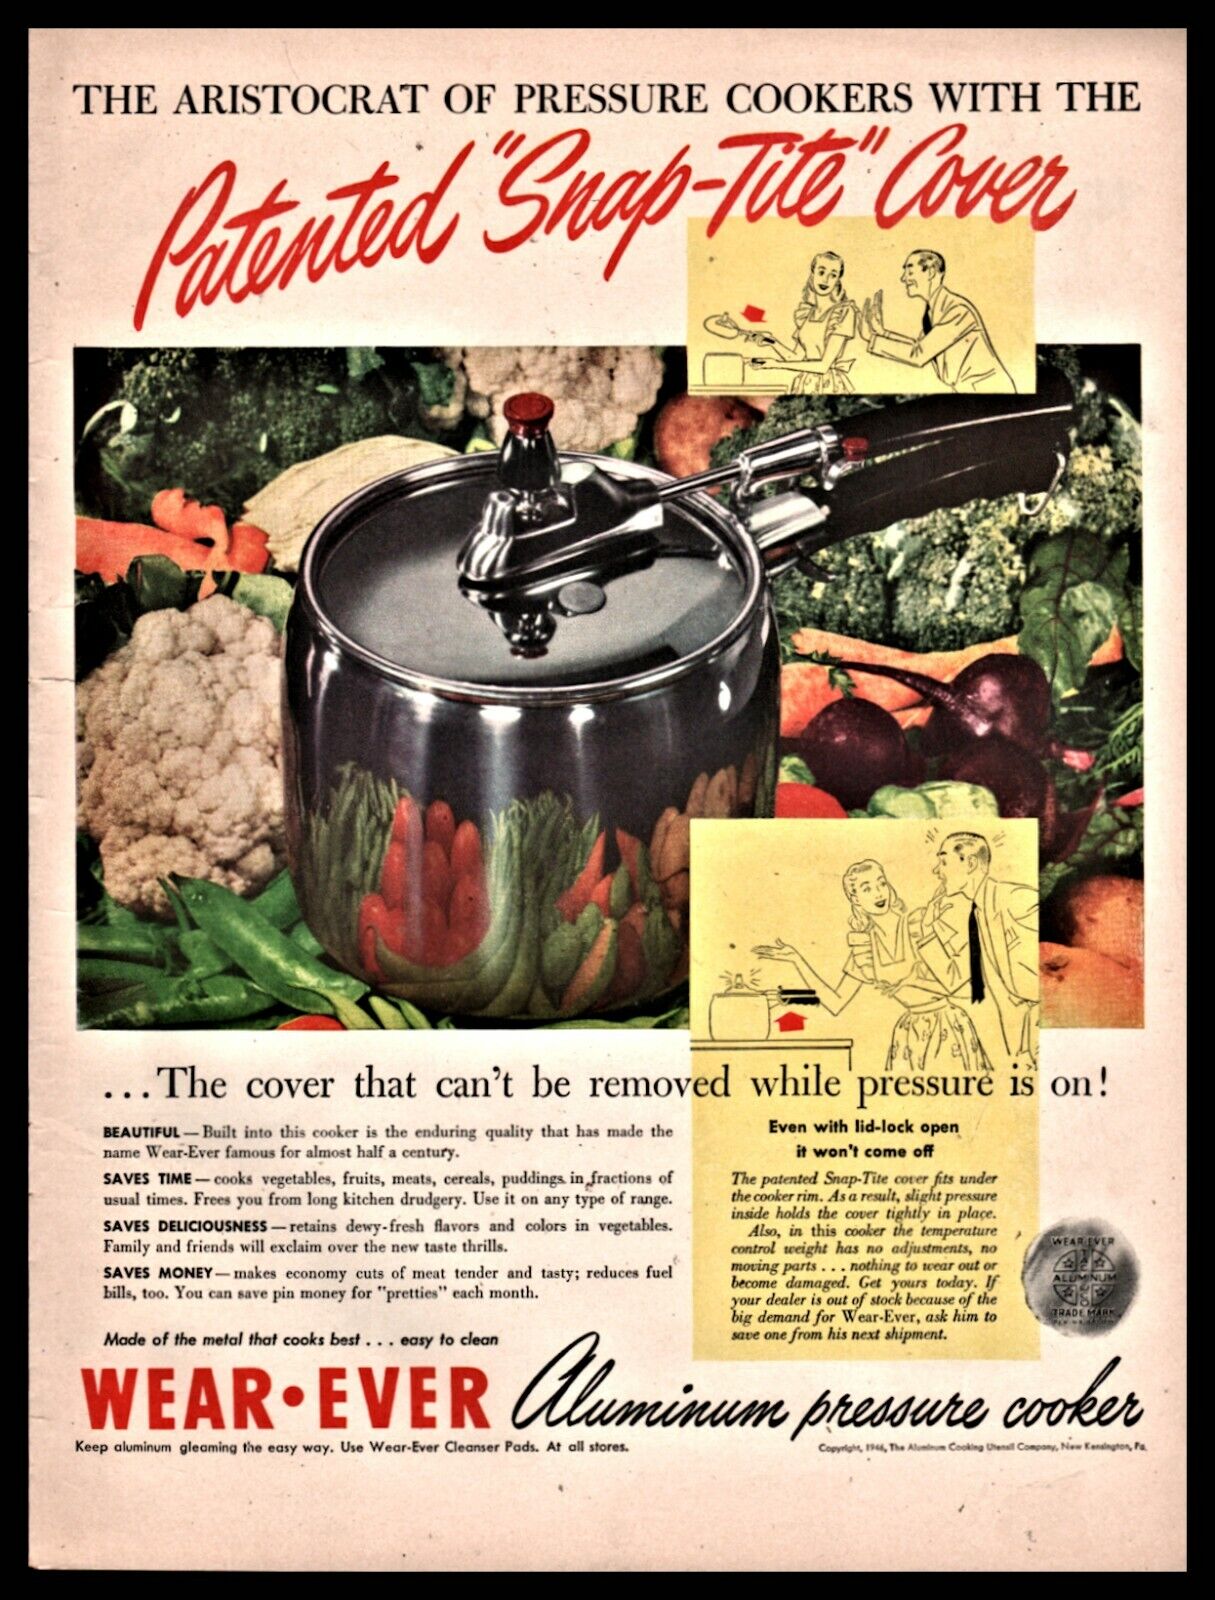 1946 WEAR-EVER Aluminum Pressure Cooker Mid-Century Kitchen Cooking AD